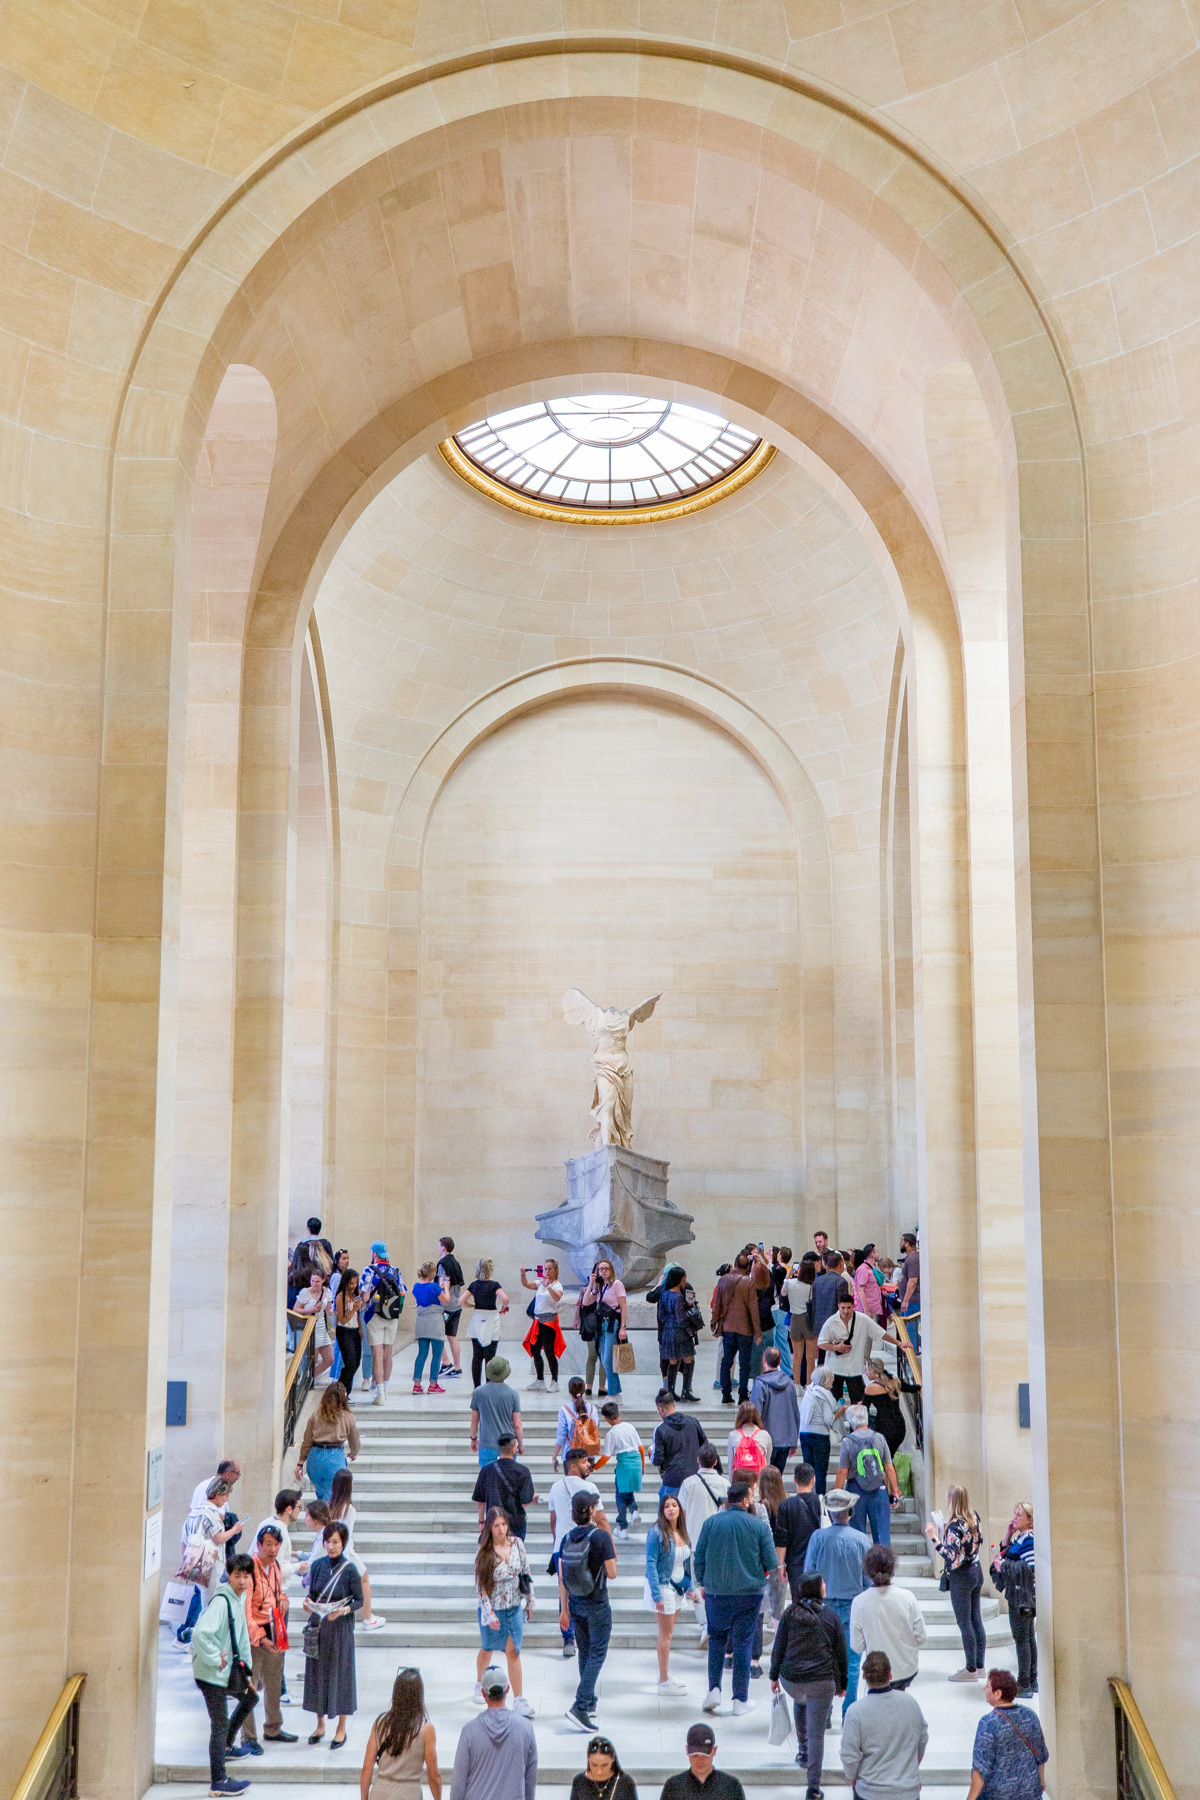 Winged Victory at Samothrace, Best things to see at the Louvre, Best Museums in Paris